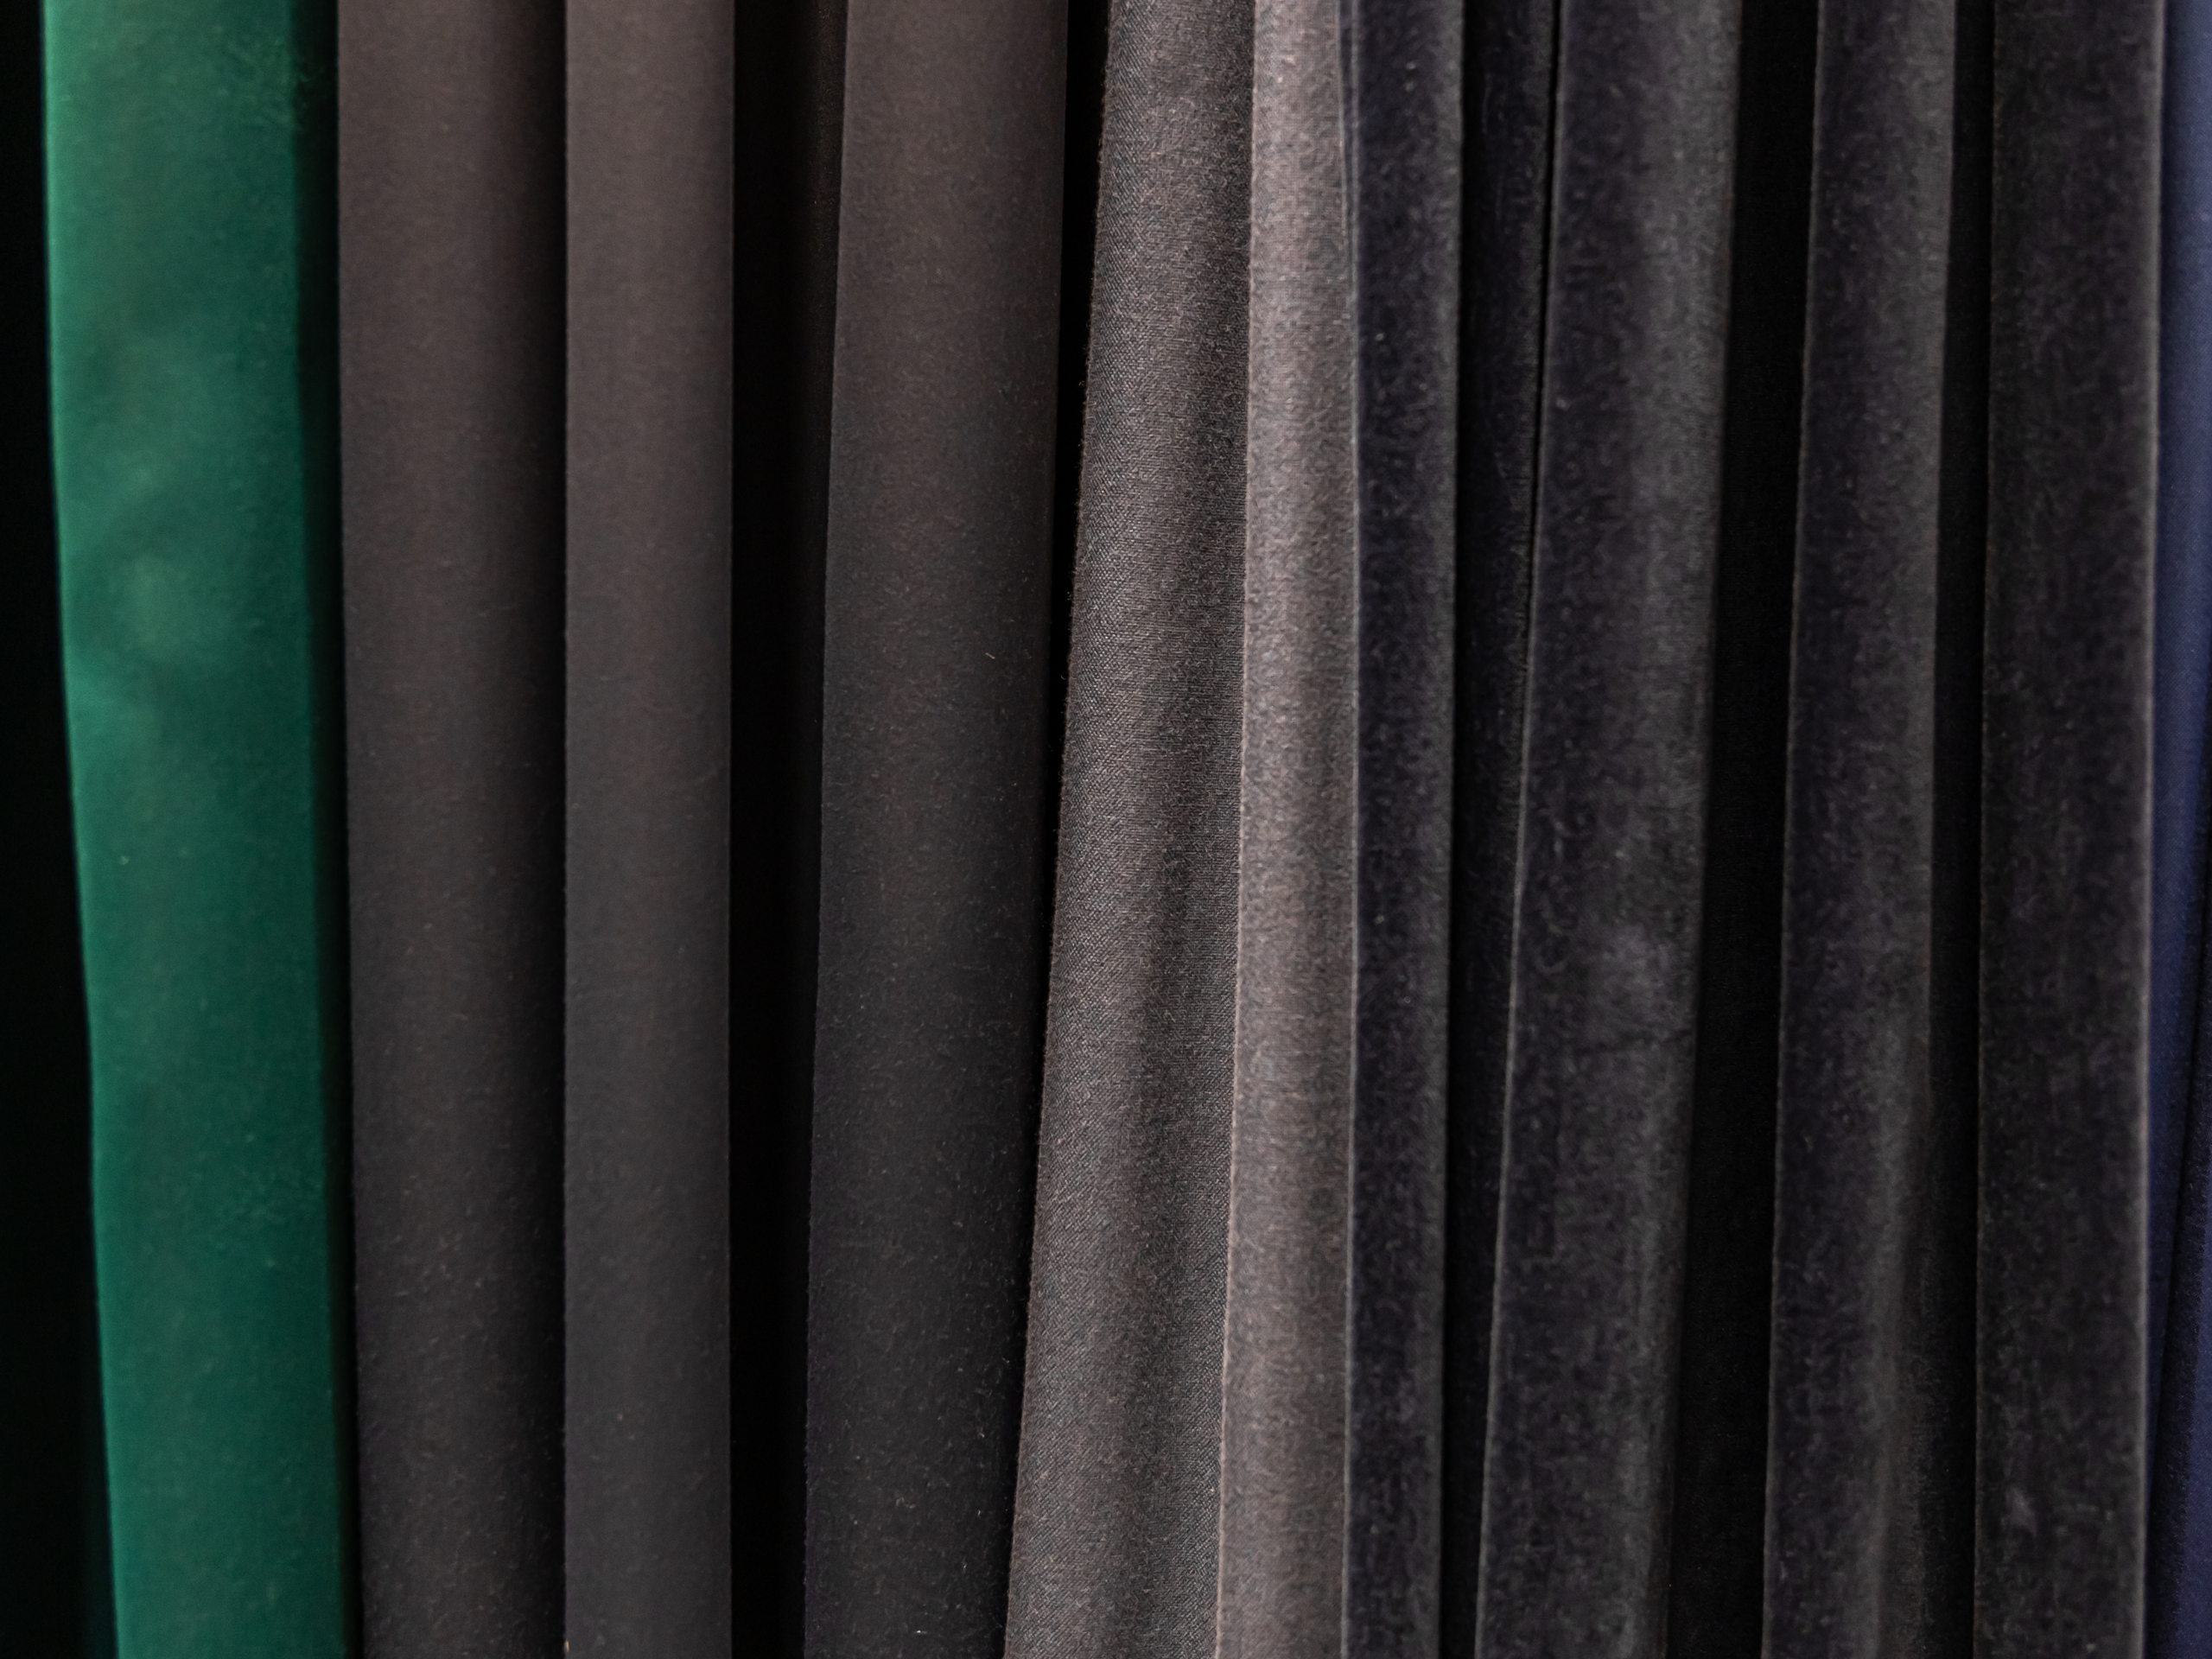 Different shades of curtain blackout fabrics